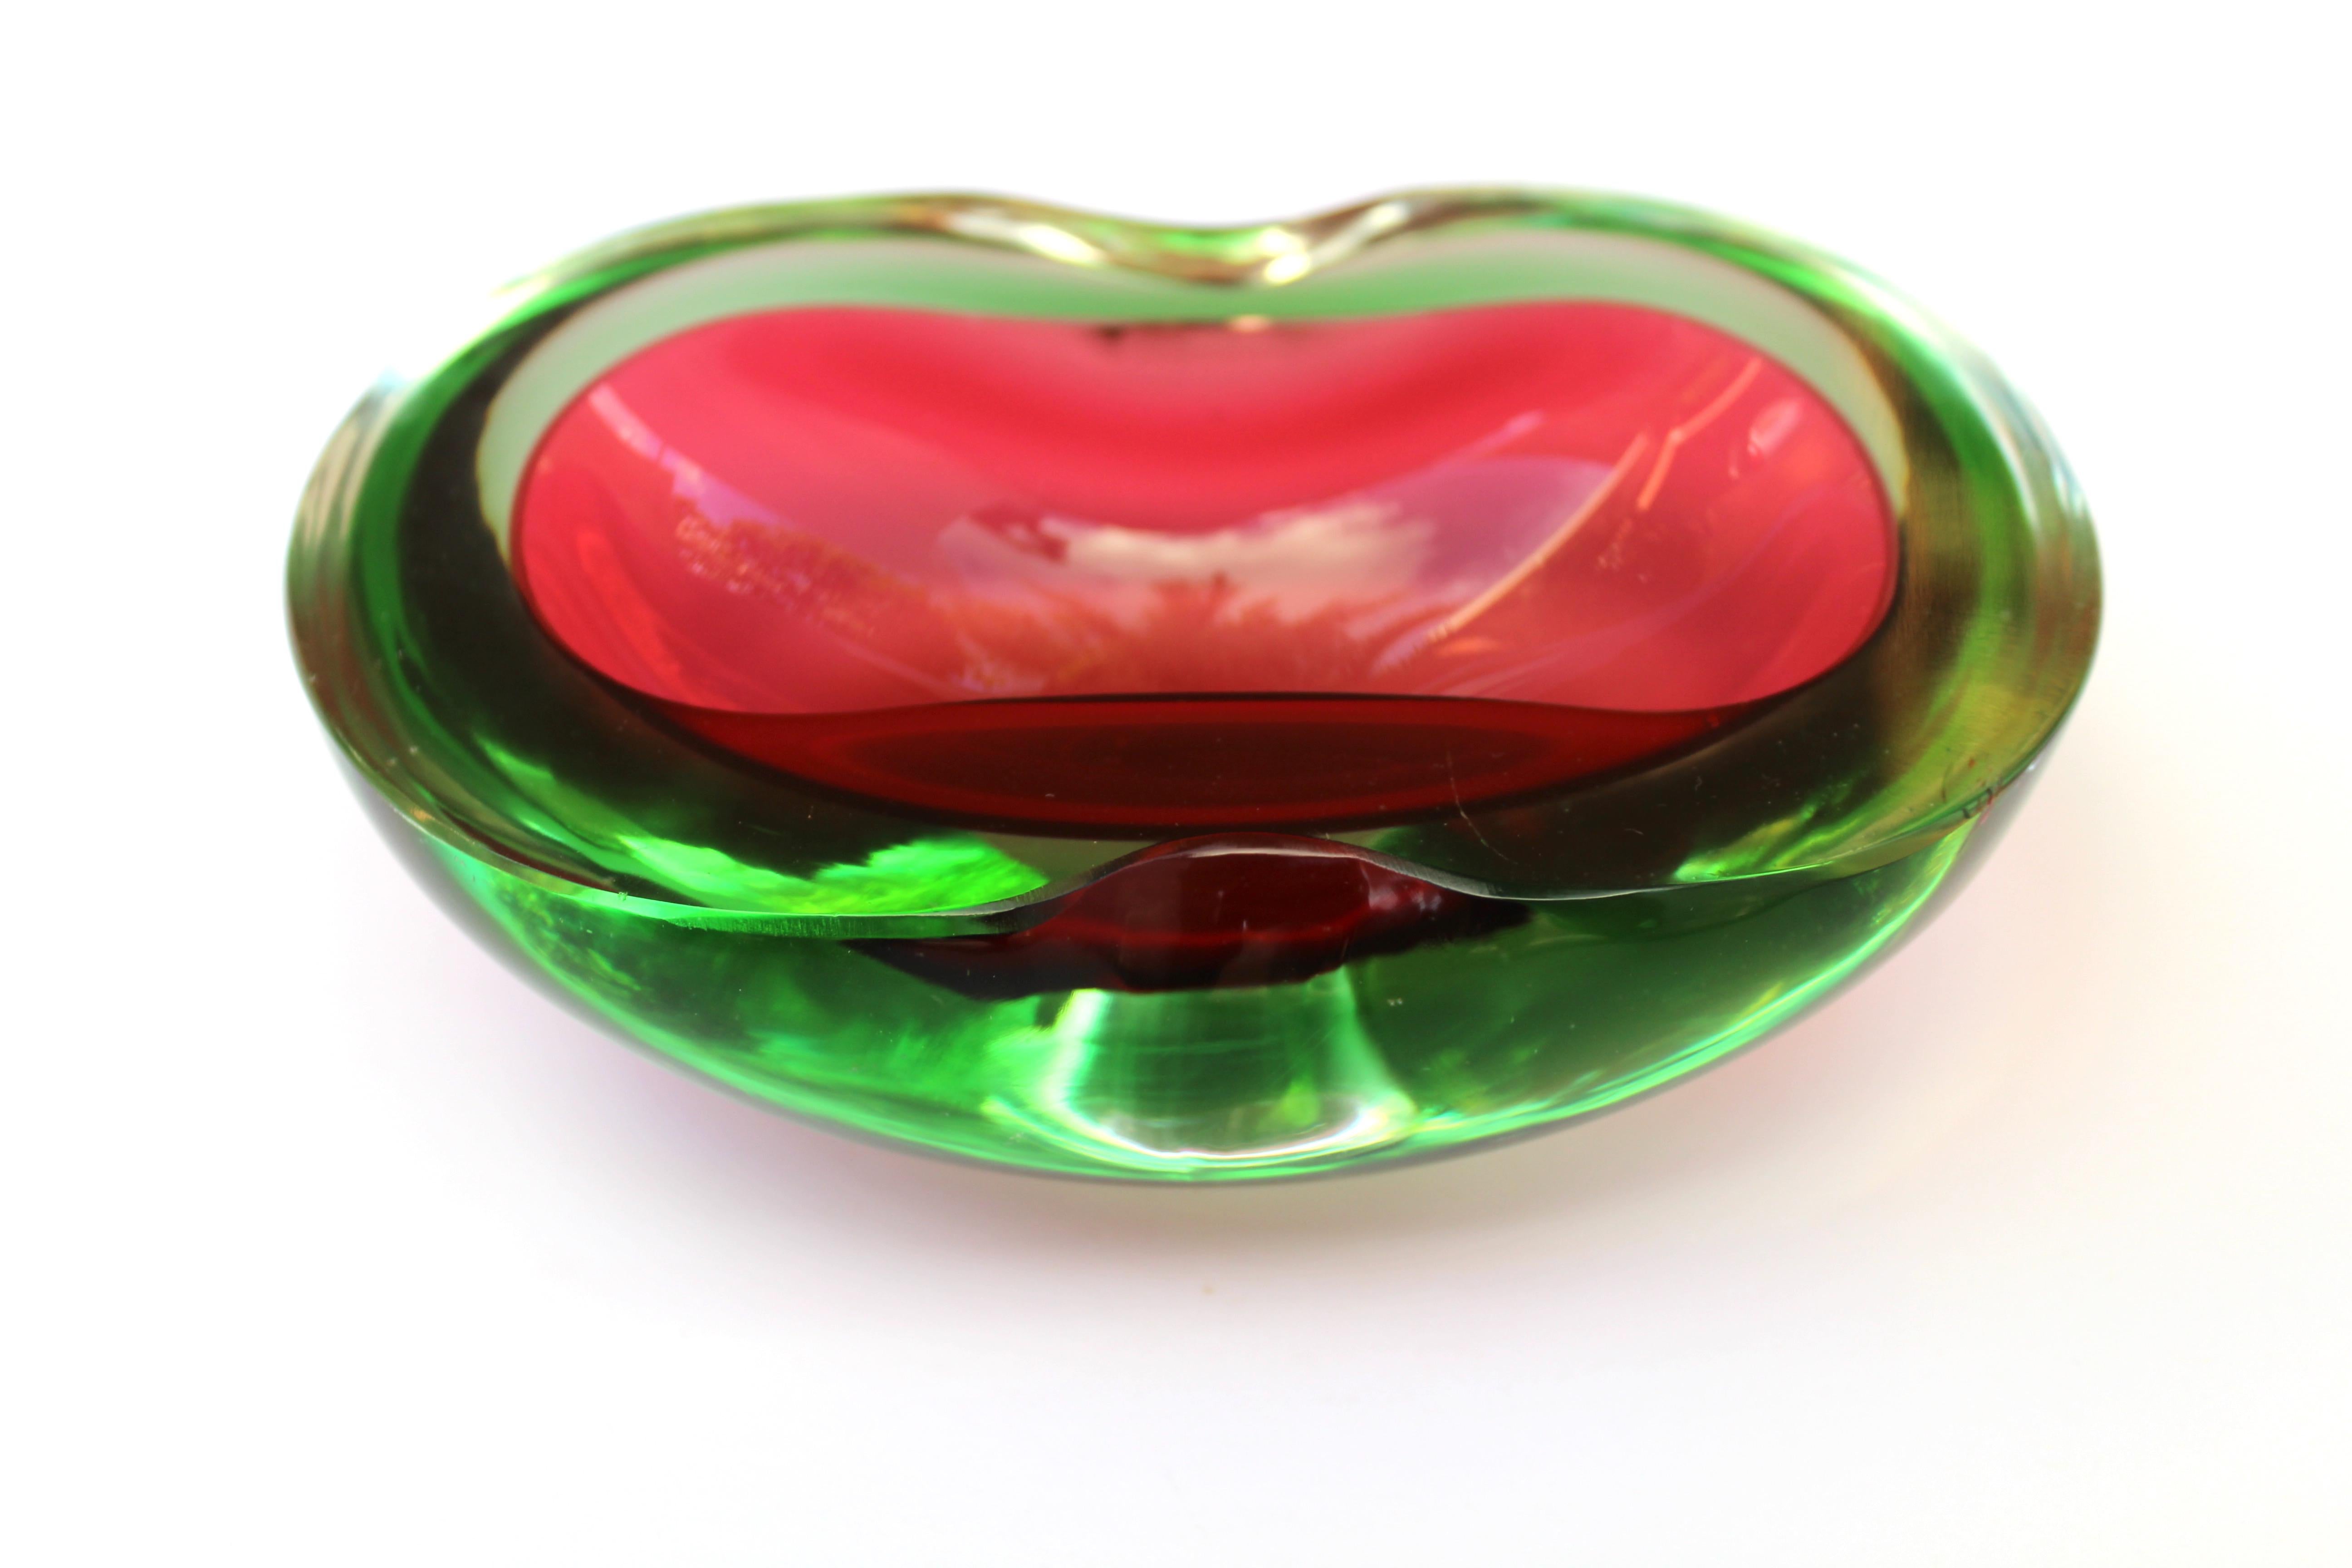 Mid-Century Modern Murano glass bowl / ashtray. Hand blown Sommerso cased glass in hues of vibrant red over green. Bowl has oval freeform with rounded edges and features two indents along the rim. Gorgeous from every angle.